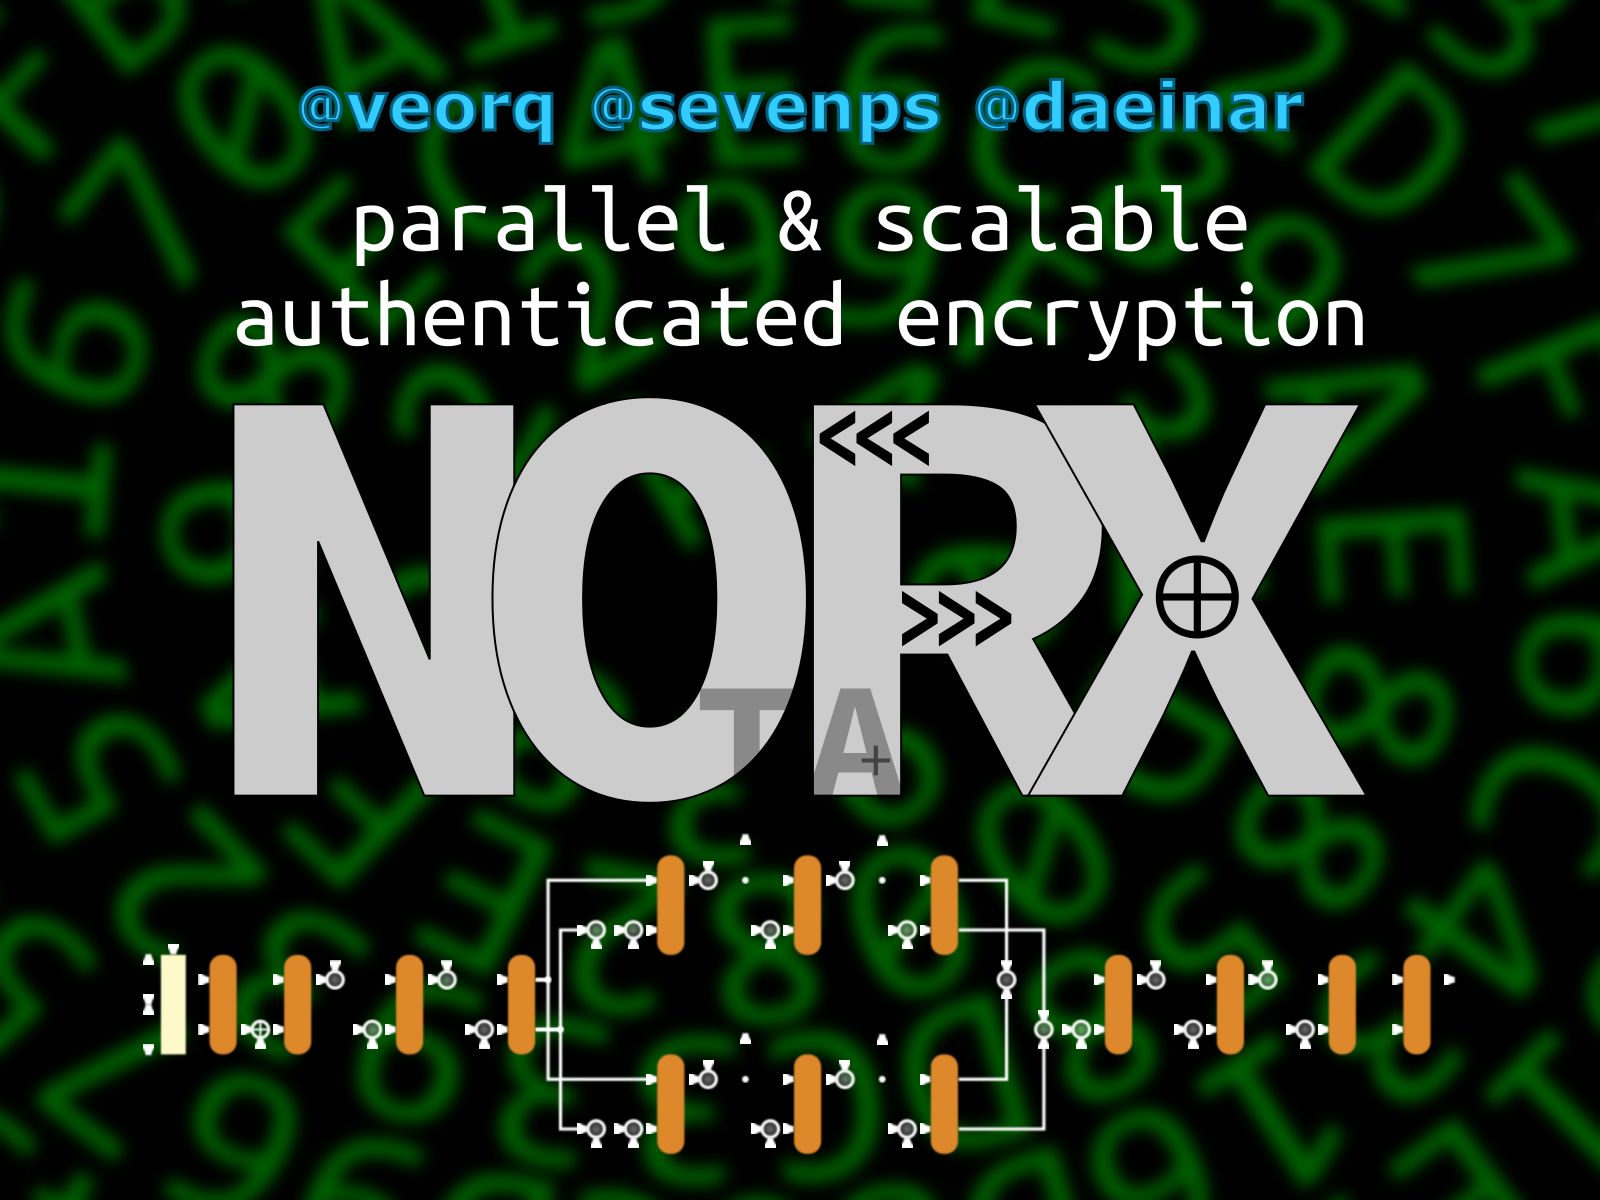 the NORX cipher